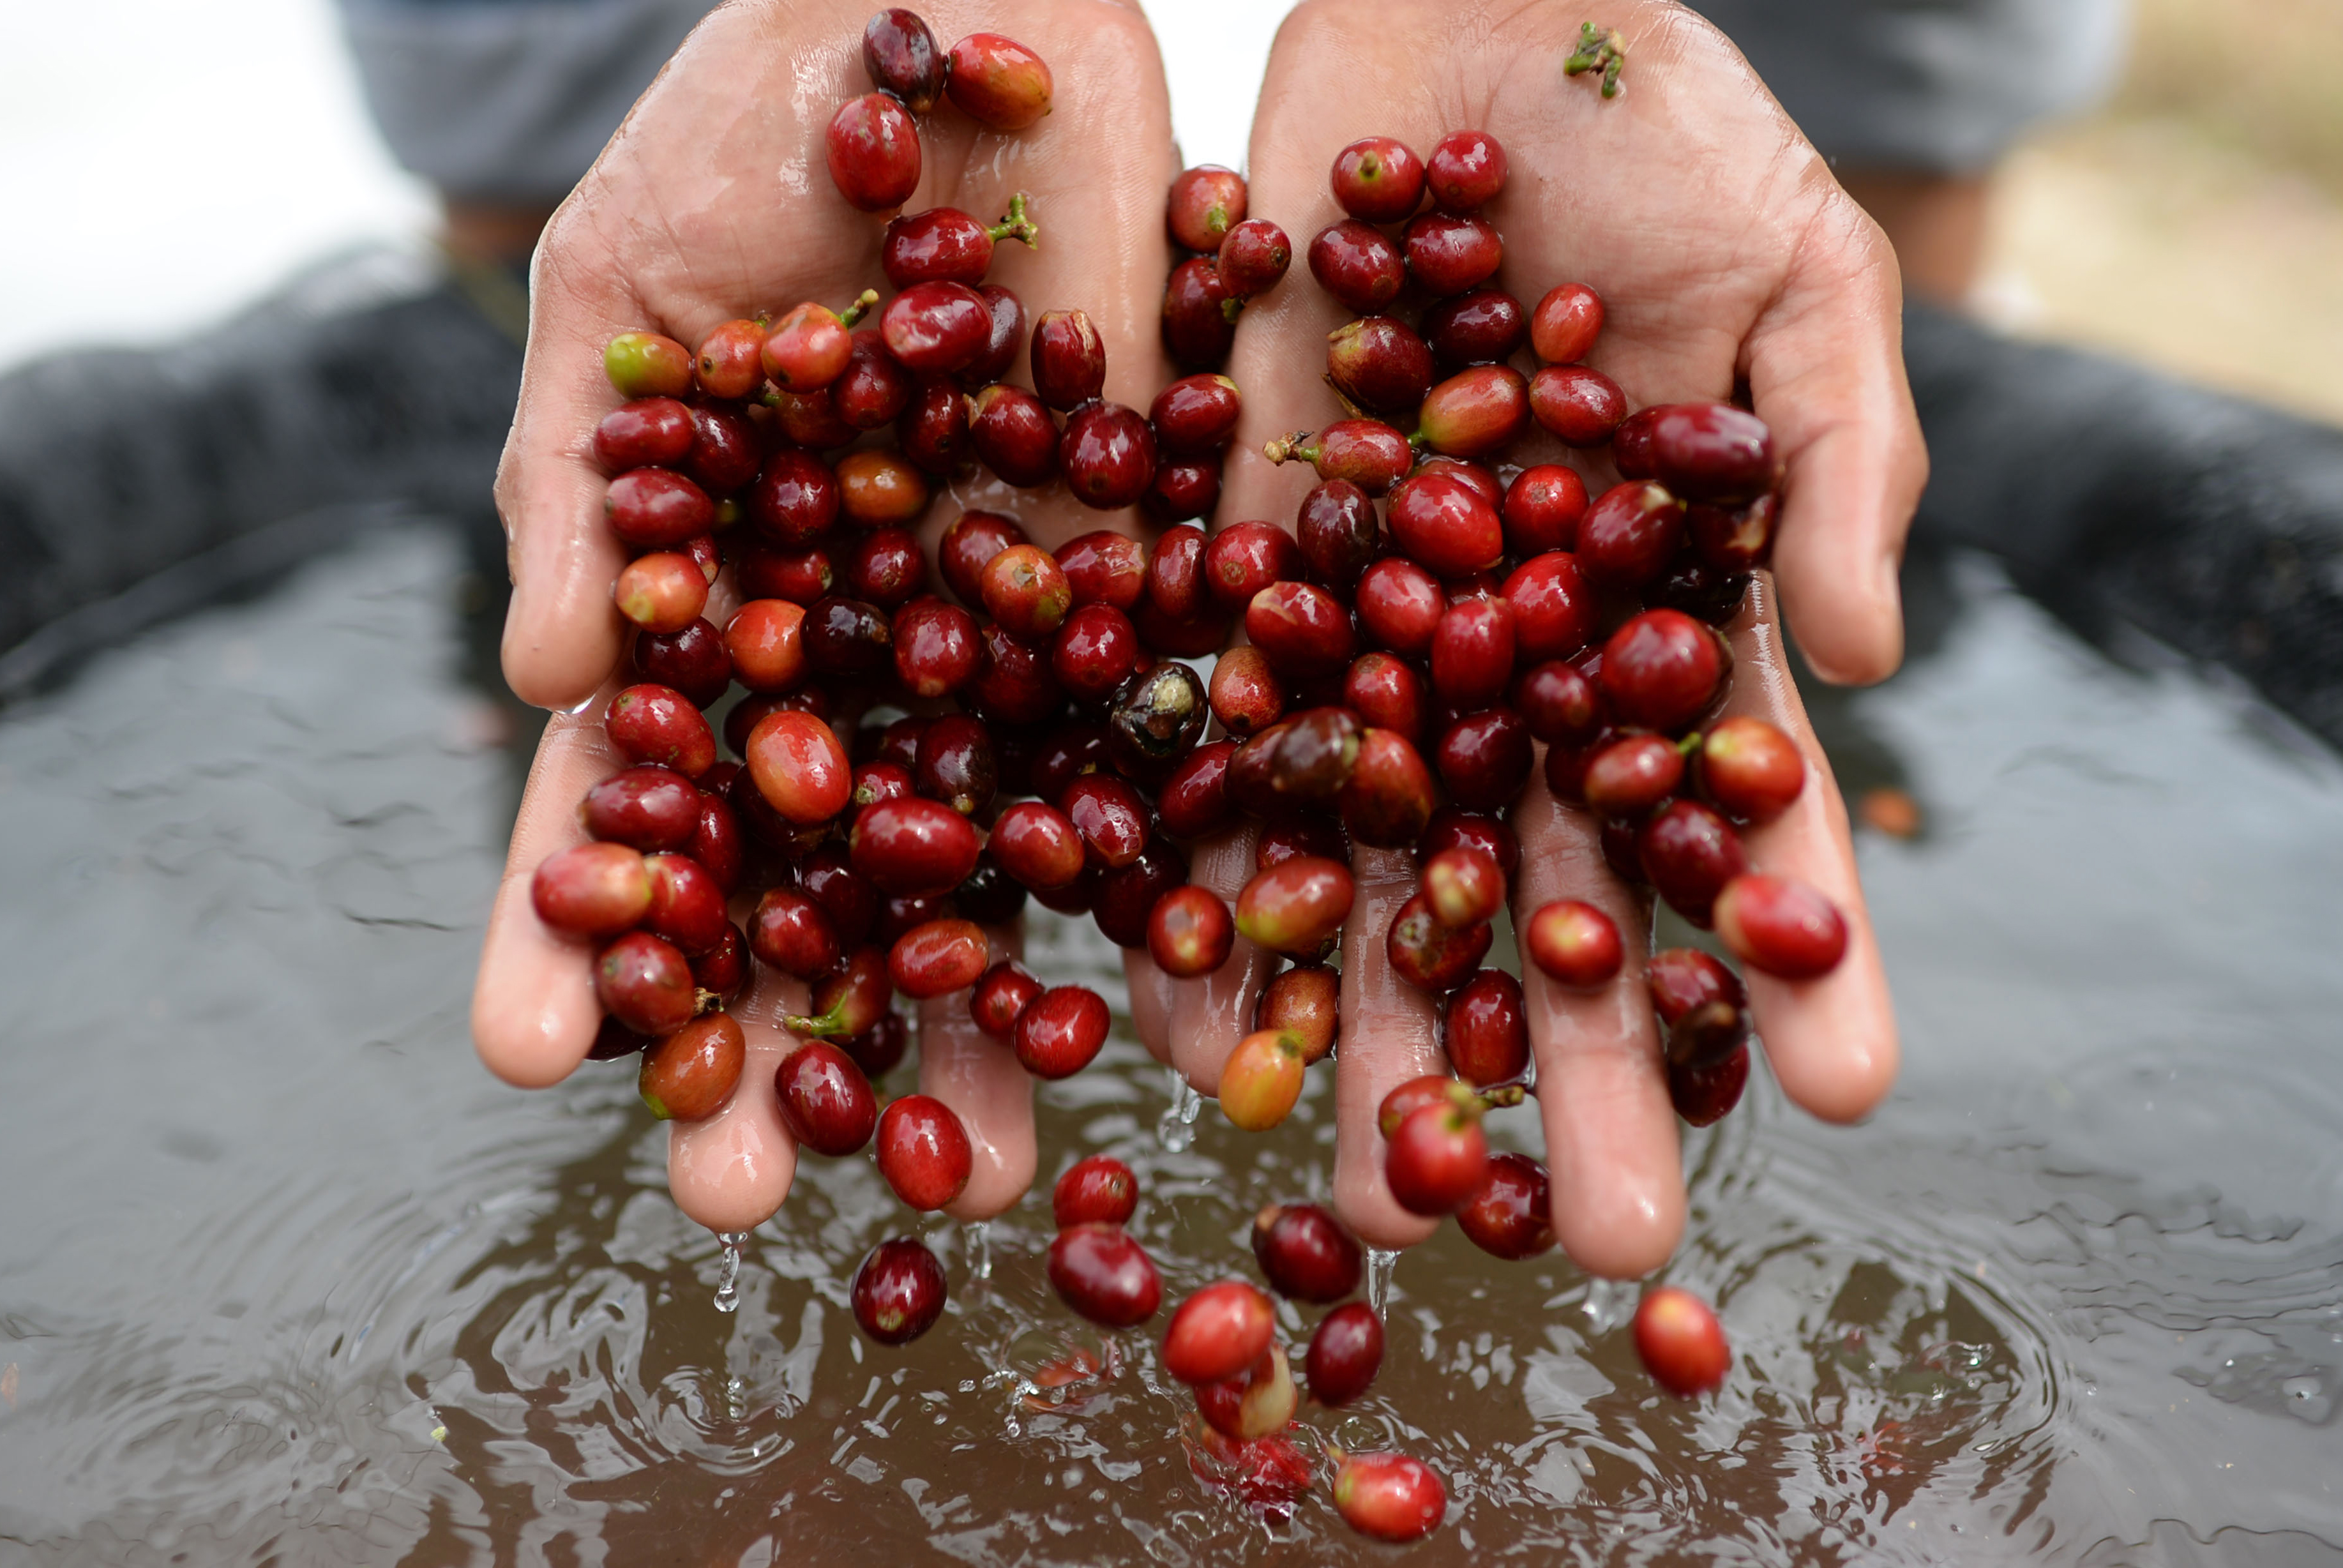 An employee holds Arabica coffee cherries for a photograph at the Solok Radjo Cooperative coffee farm in Alahan Panjang, West Sumatra, Indonesia, on Friday, July 15, 2016. Coffee production in Indonesia will probably drop 10 percent this year after dry weather caused by the worst El Nino in almost two decades damaged some crops and delayed the harvest. (Dimas Ardian/Bloomberg via Getty Images)